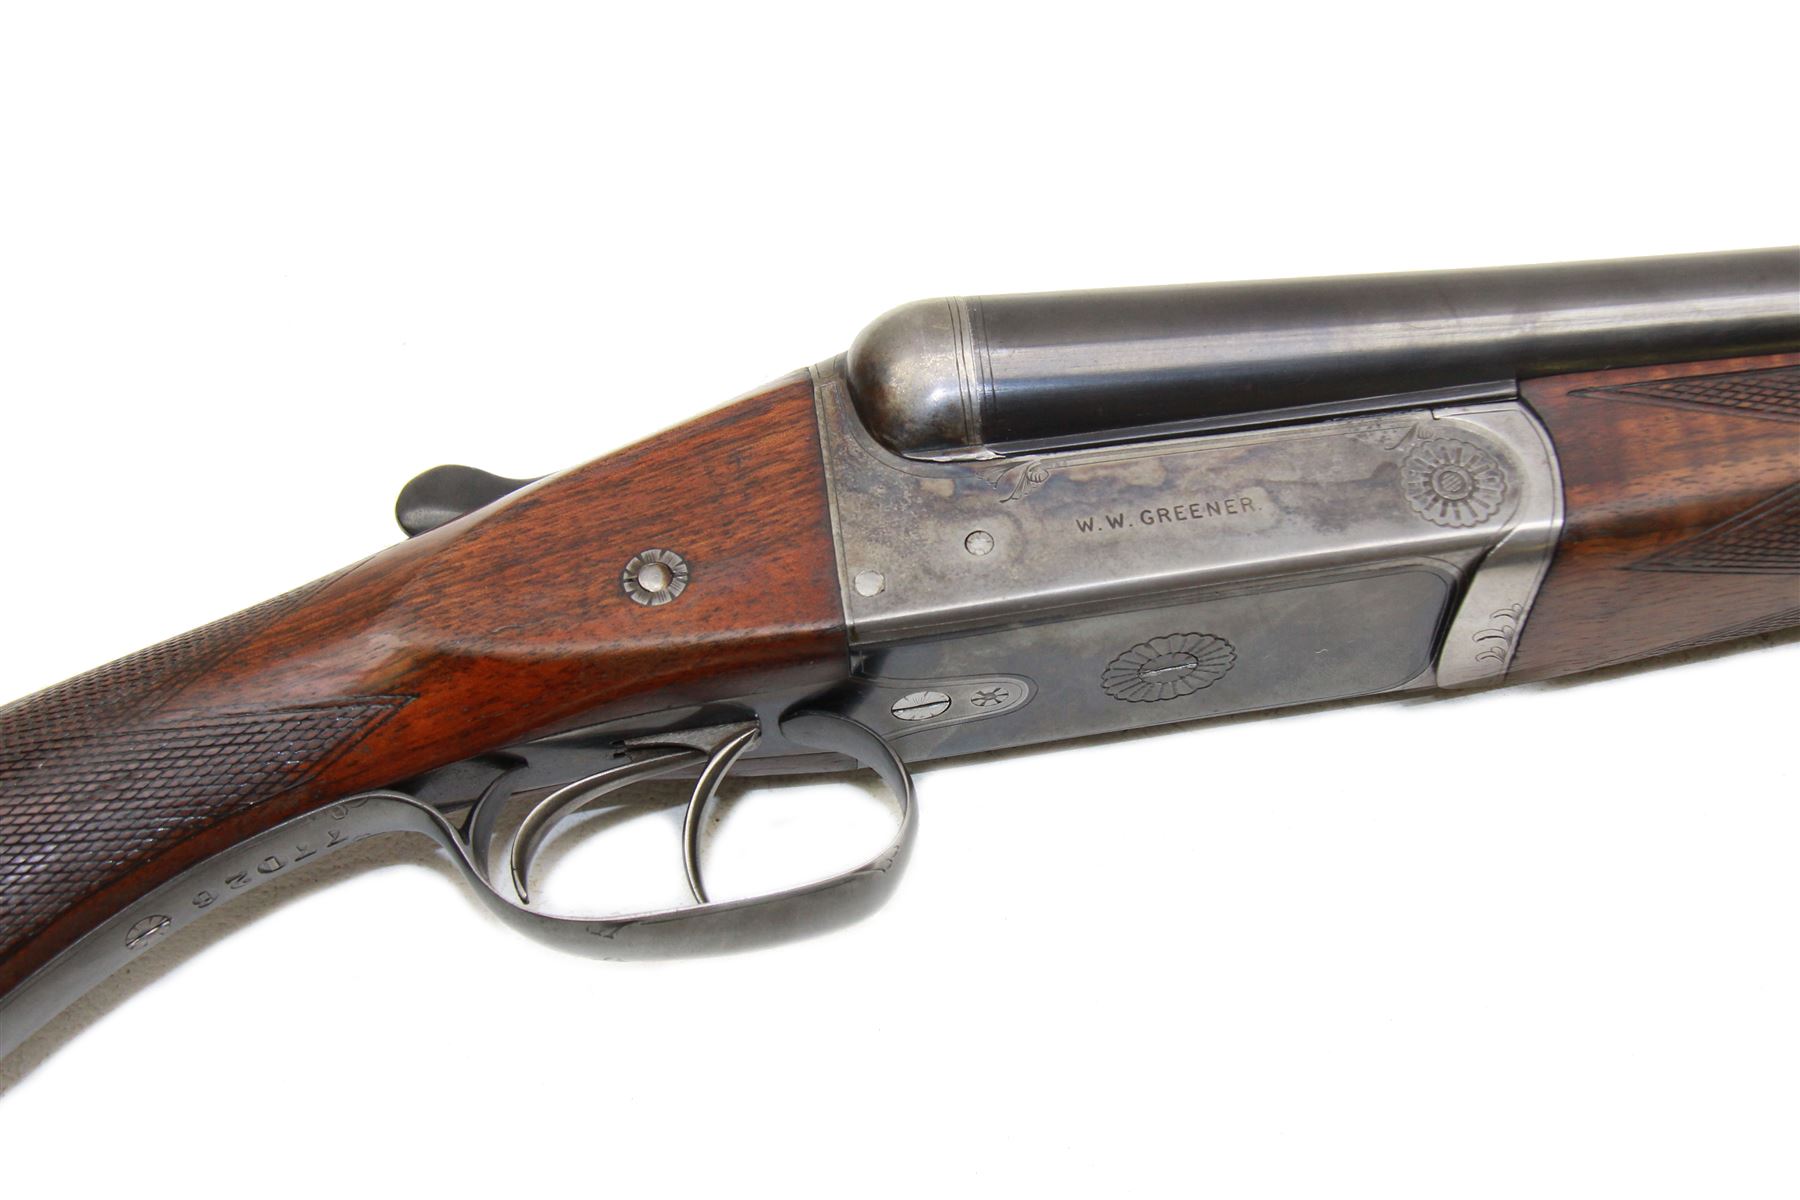 SHOTGUN CERTIFICATE REQUIRED- W.W Greener 12 bore side-by-side boxlock non ejector double trigger Em